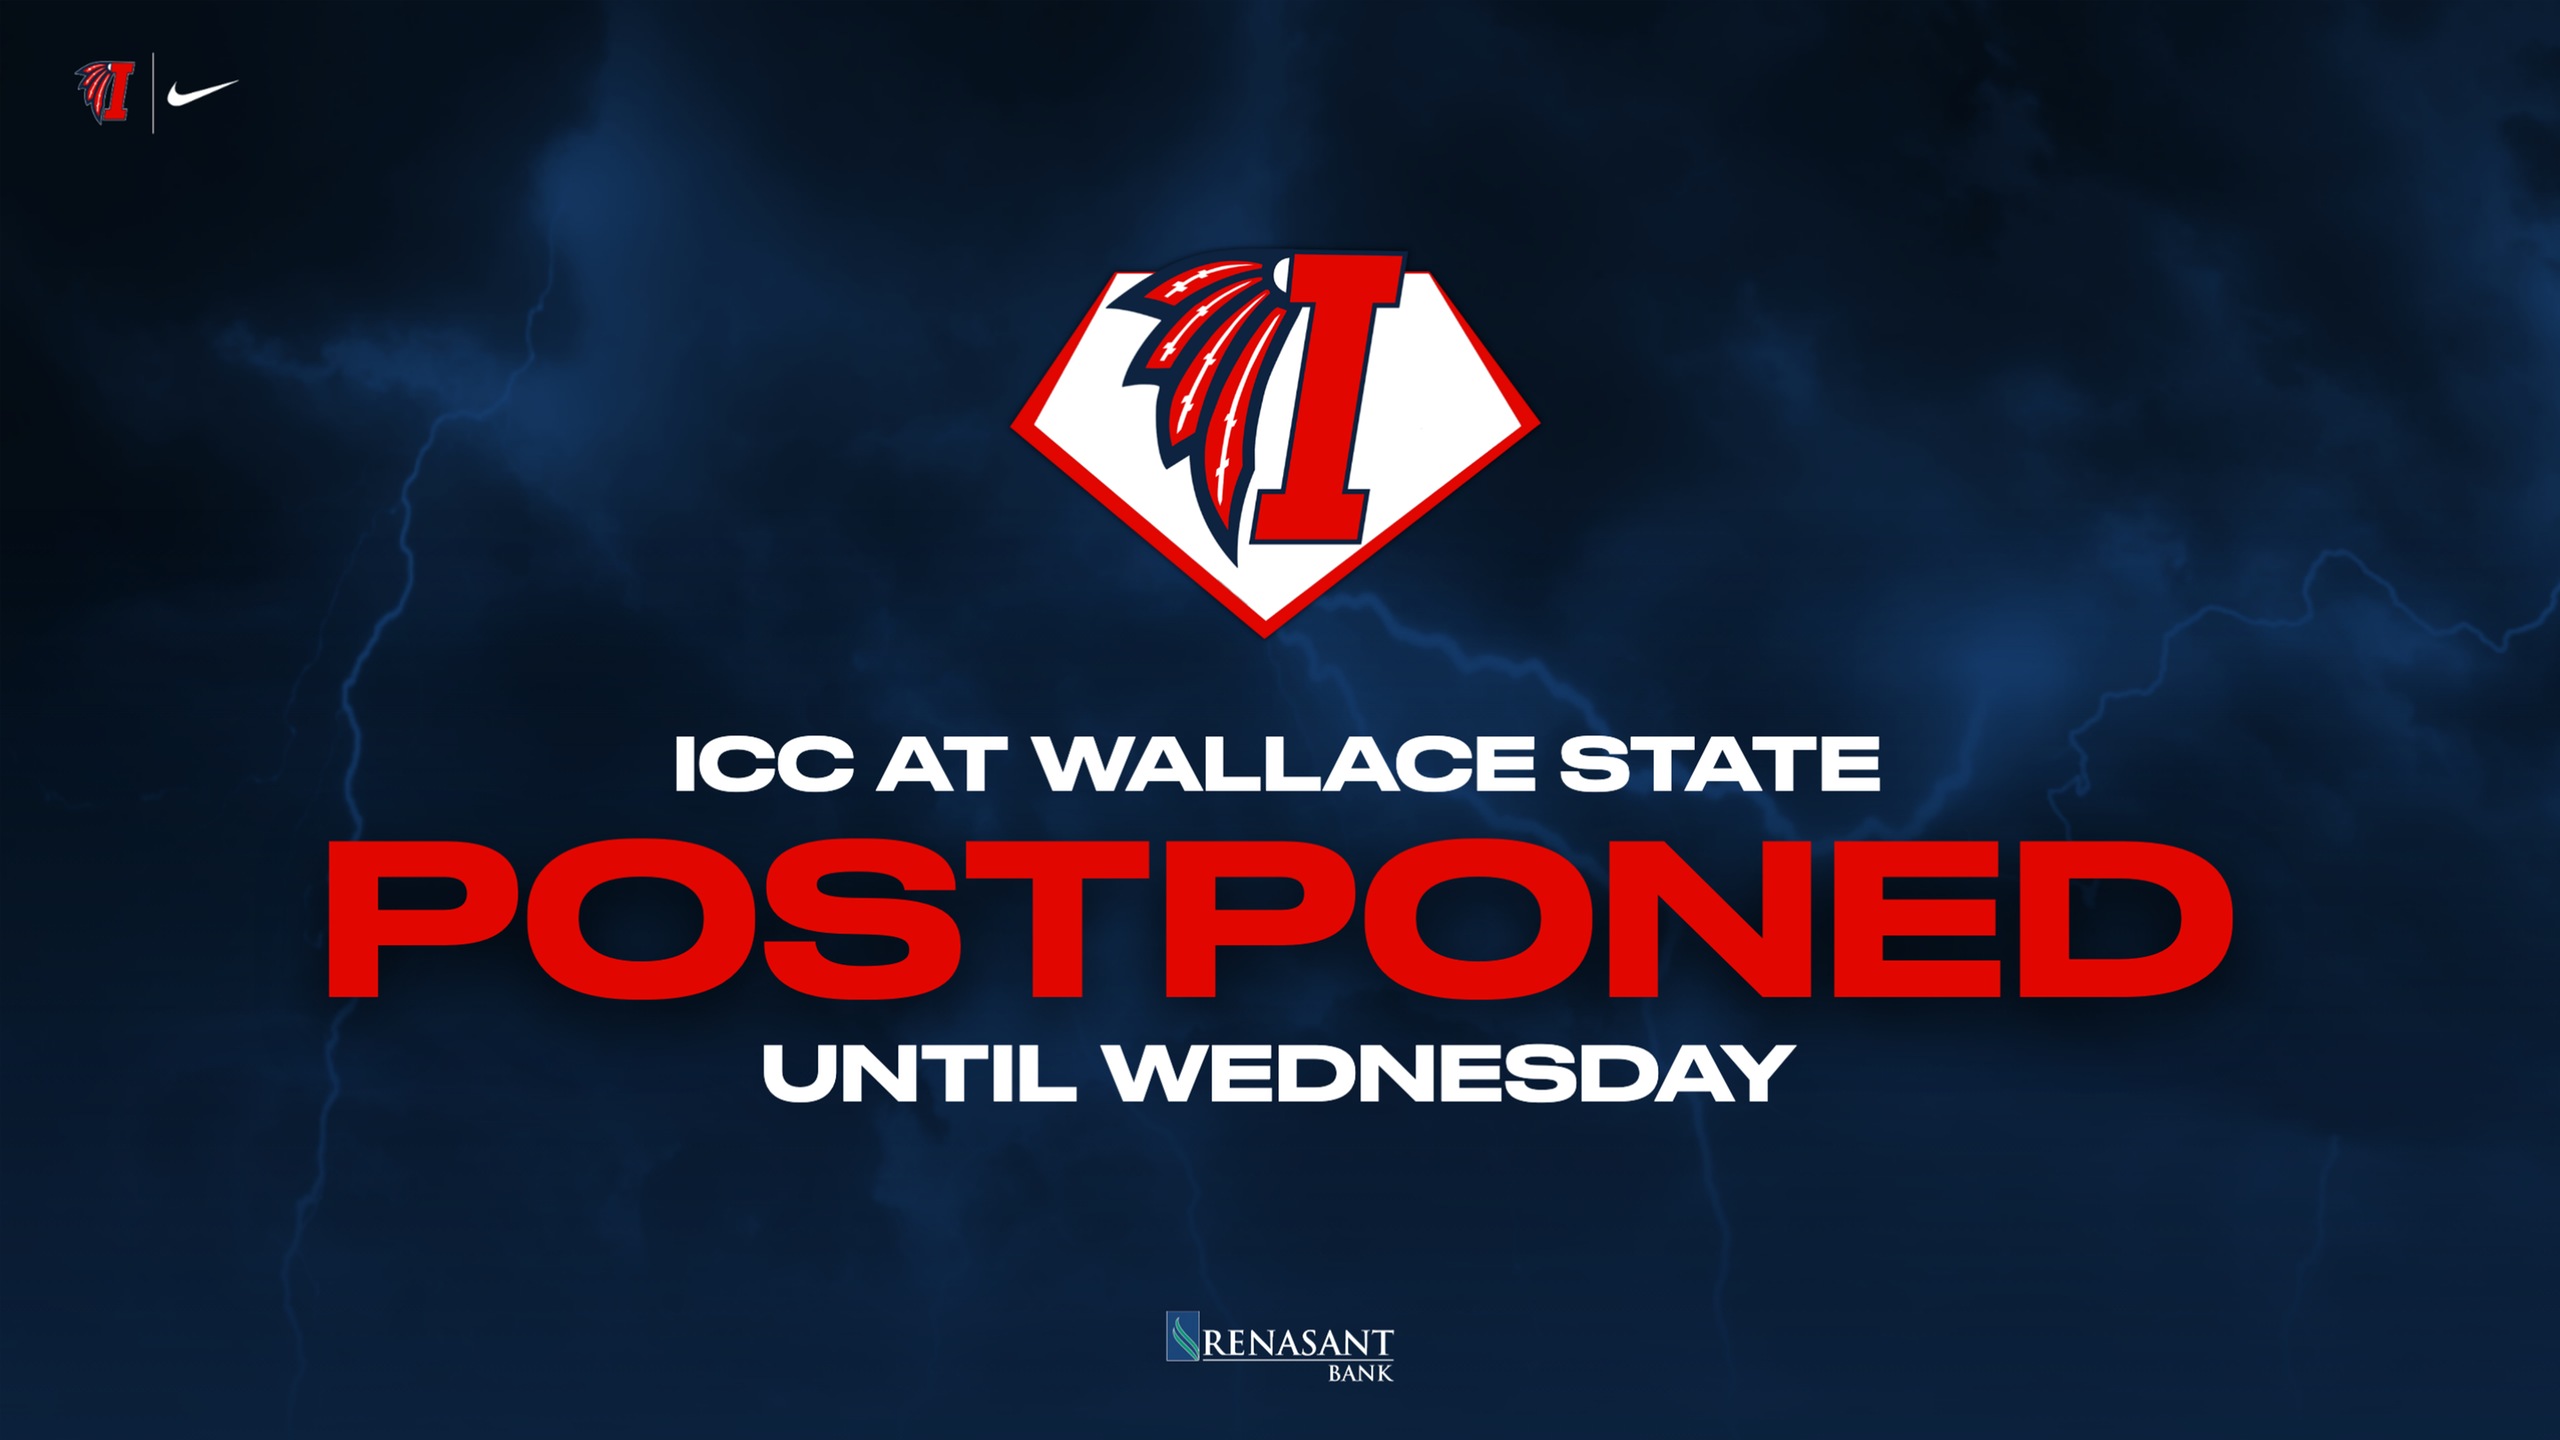 Schedule Change: Wallace State DH moved to Wednesday